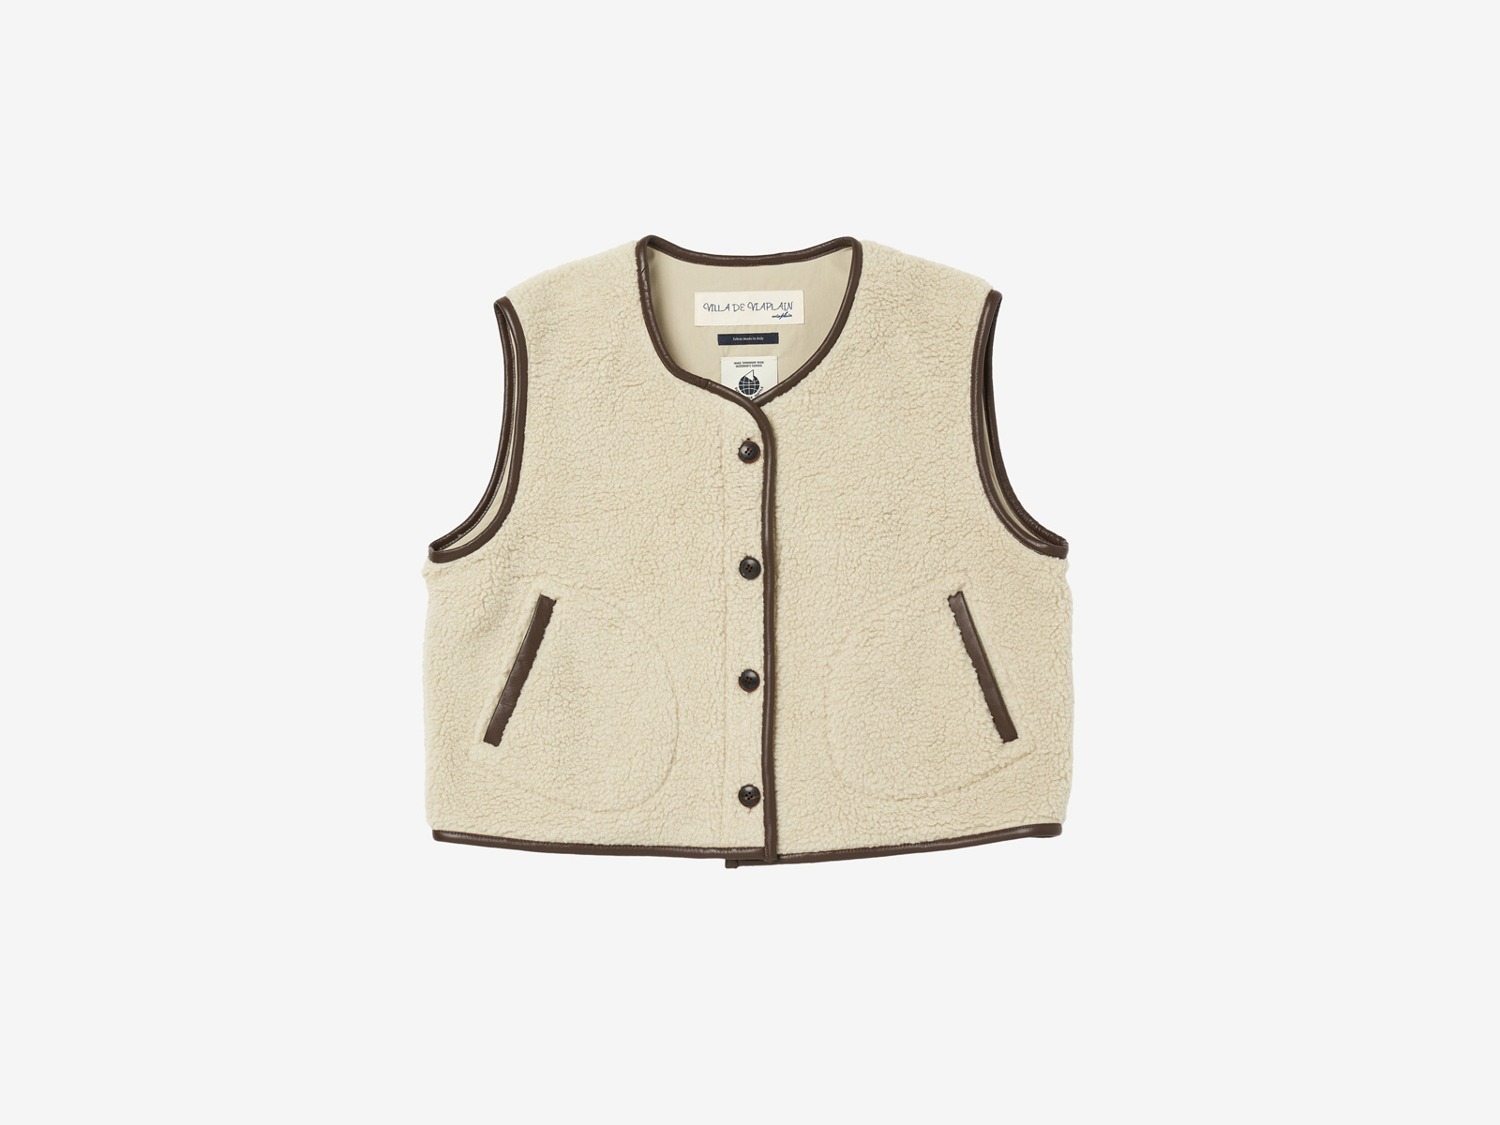 Via Leather taping vest (ivory)